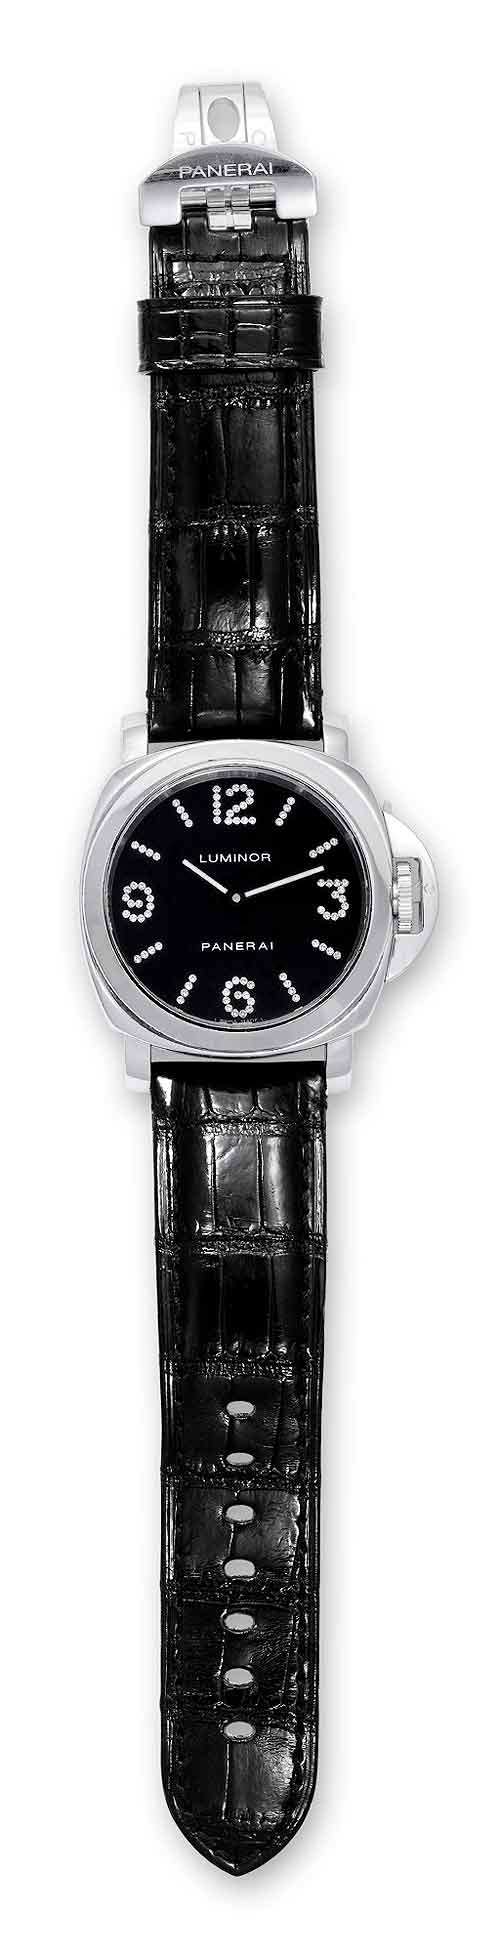 www.watchtime.com | blog  | Fratello Friday: 5 Watches With Diamonds That Men Can Actually Wear | Panerai Luminor 500